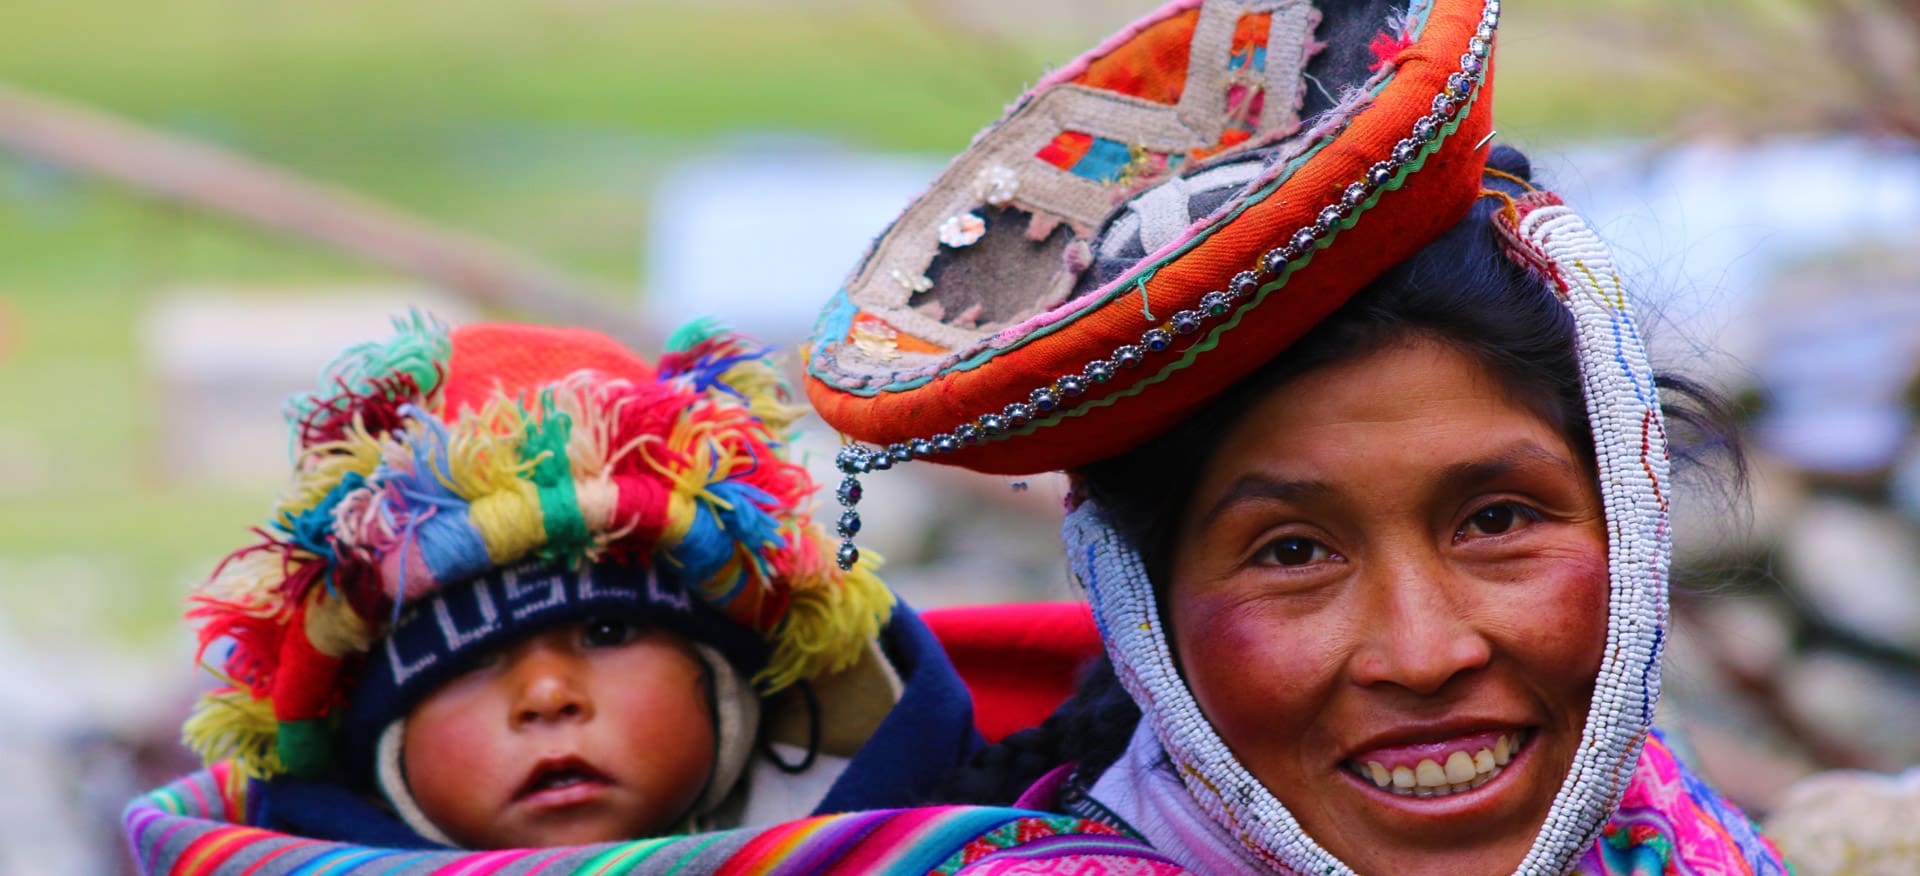 A woman and child wearing colorful hats.